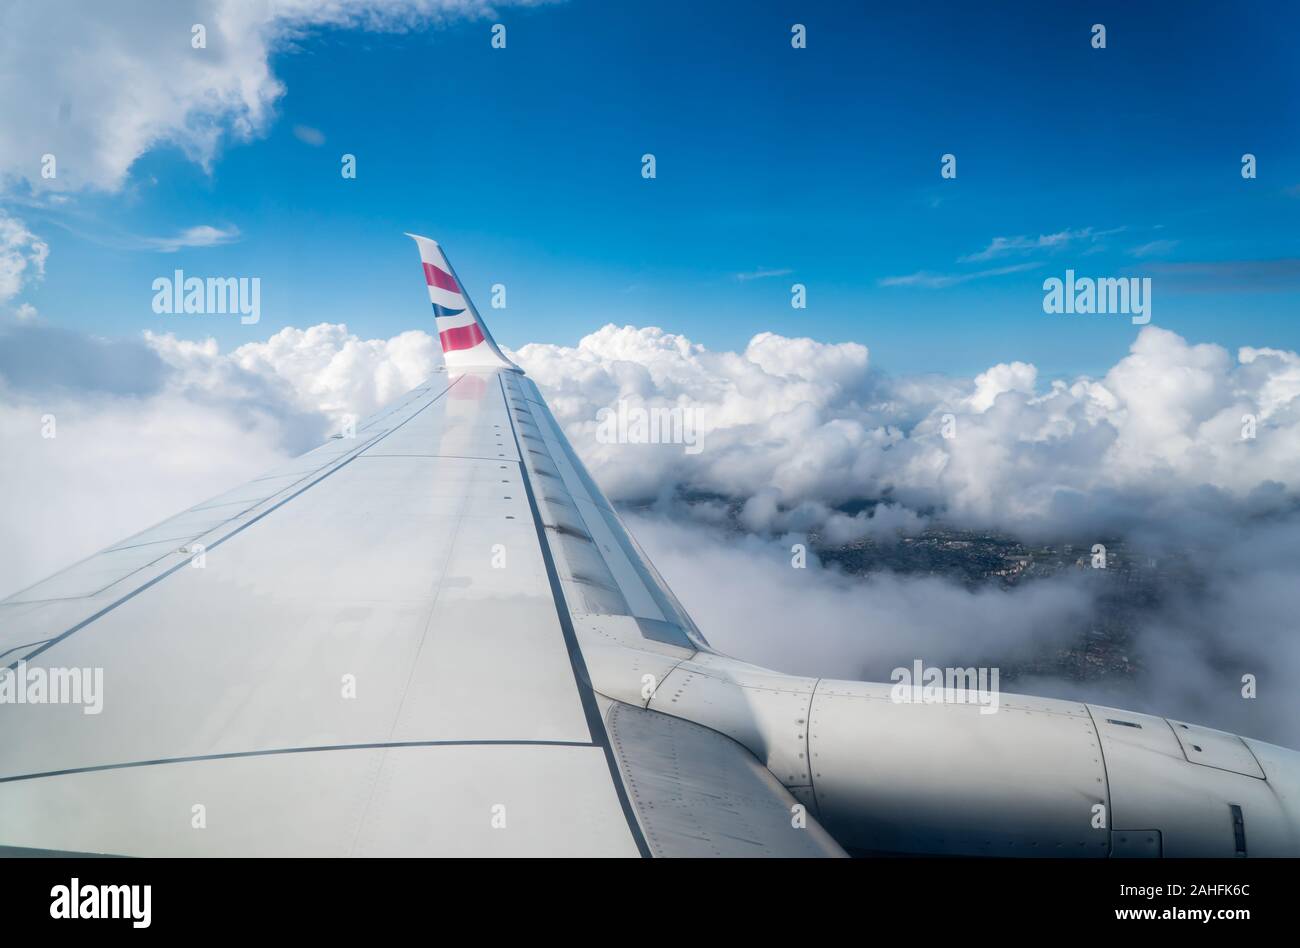 British airways, Comair winglet logo on fixed wing of an airplane flying above the clouds and in blue sky above land in Mauritius Stock Photo